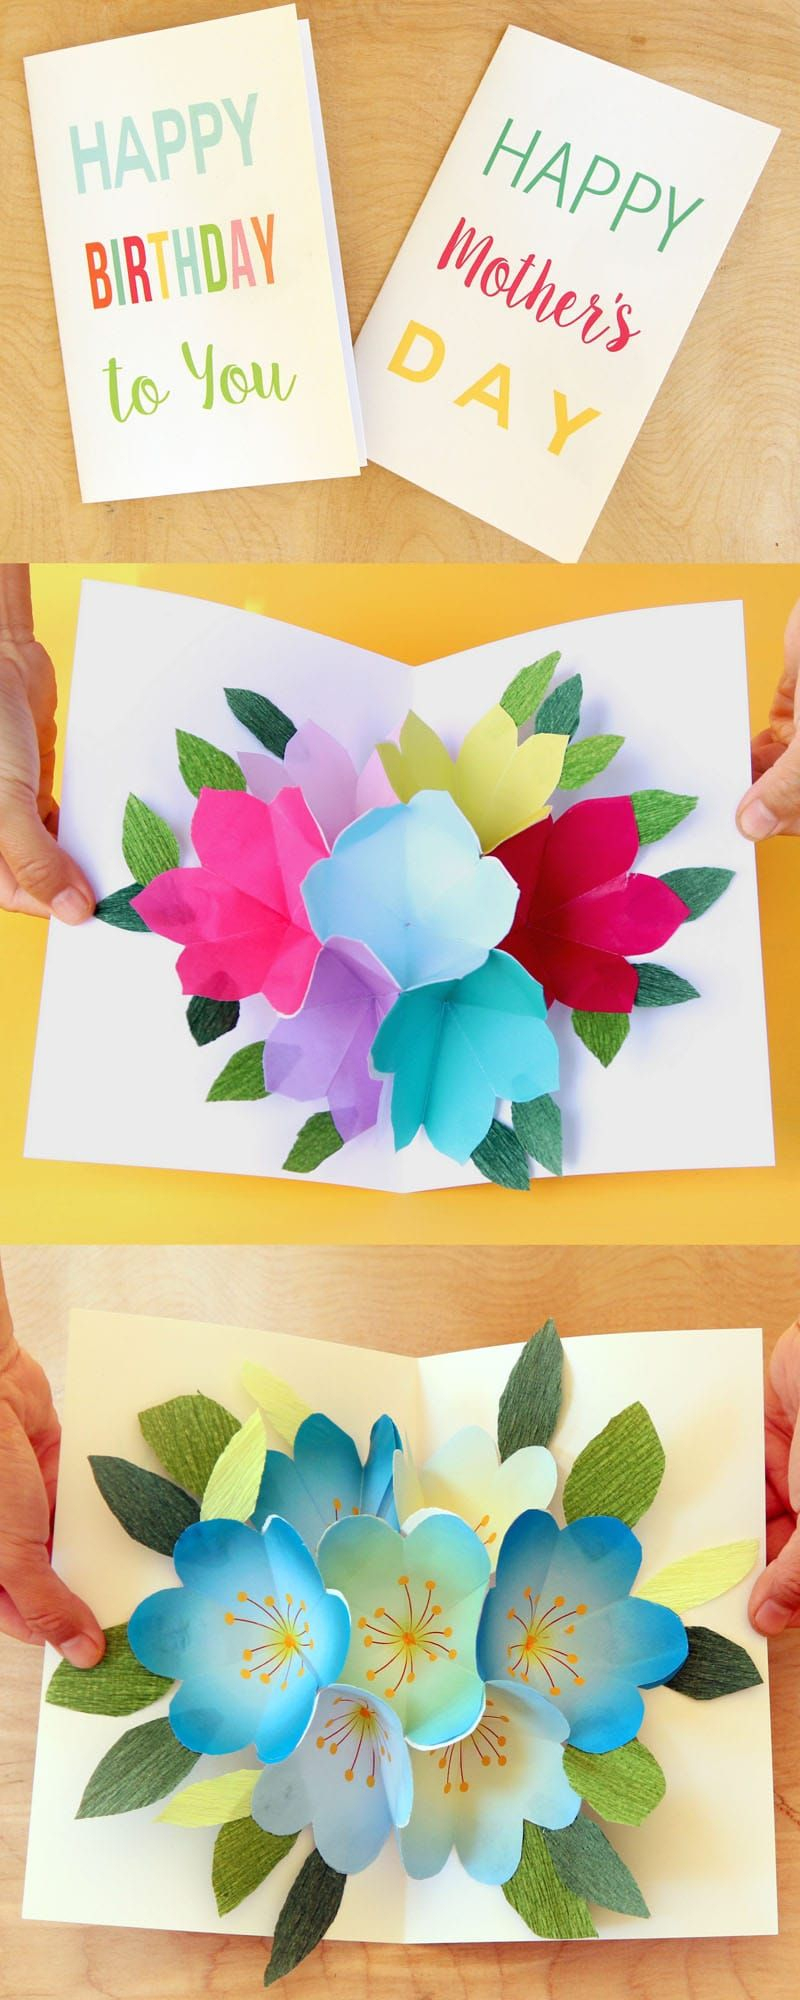 Free Printable Happy Birthday Card With Pop Up Bouquet | Printables - Free Printable Pop Up Birthday Card Templates